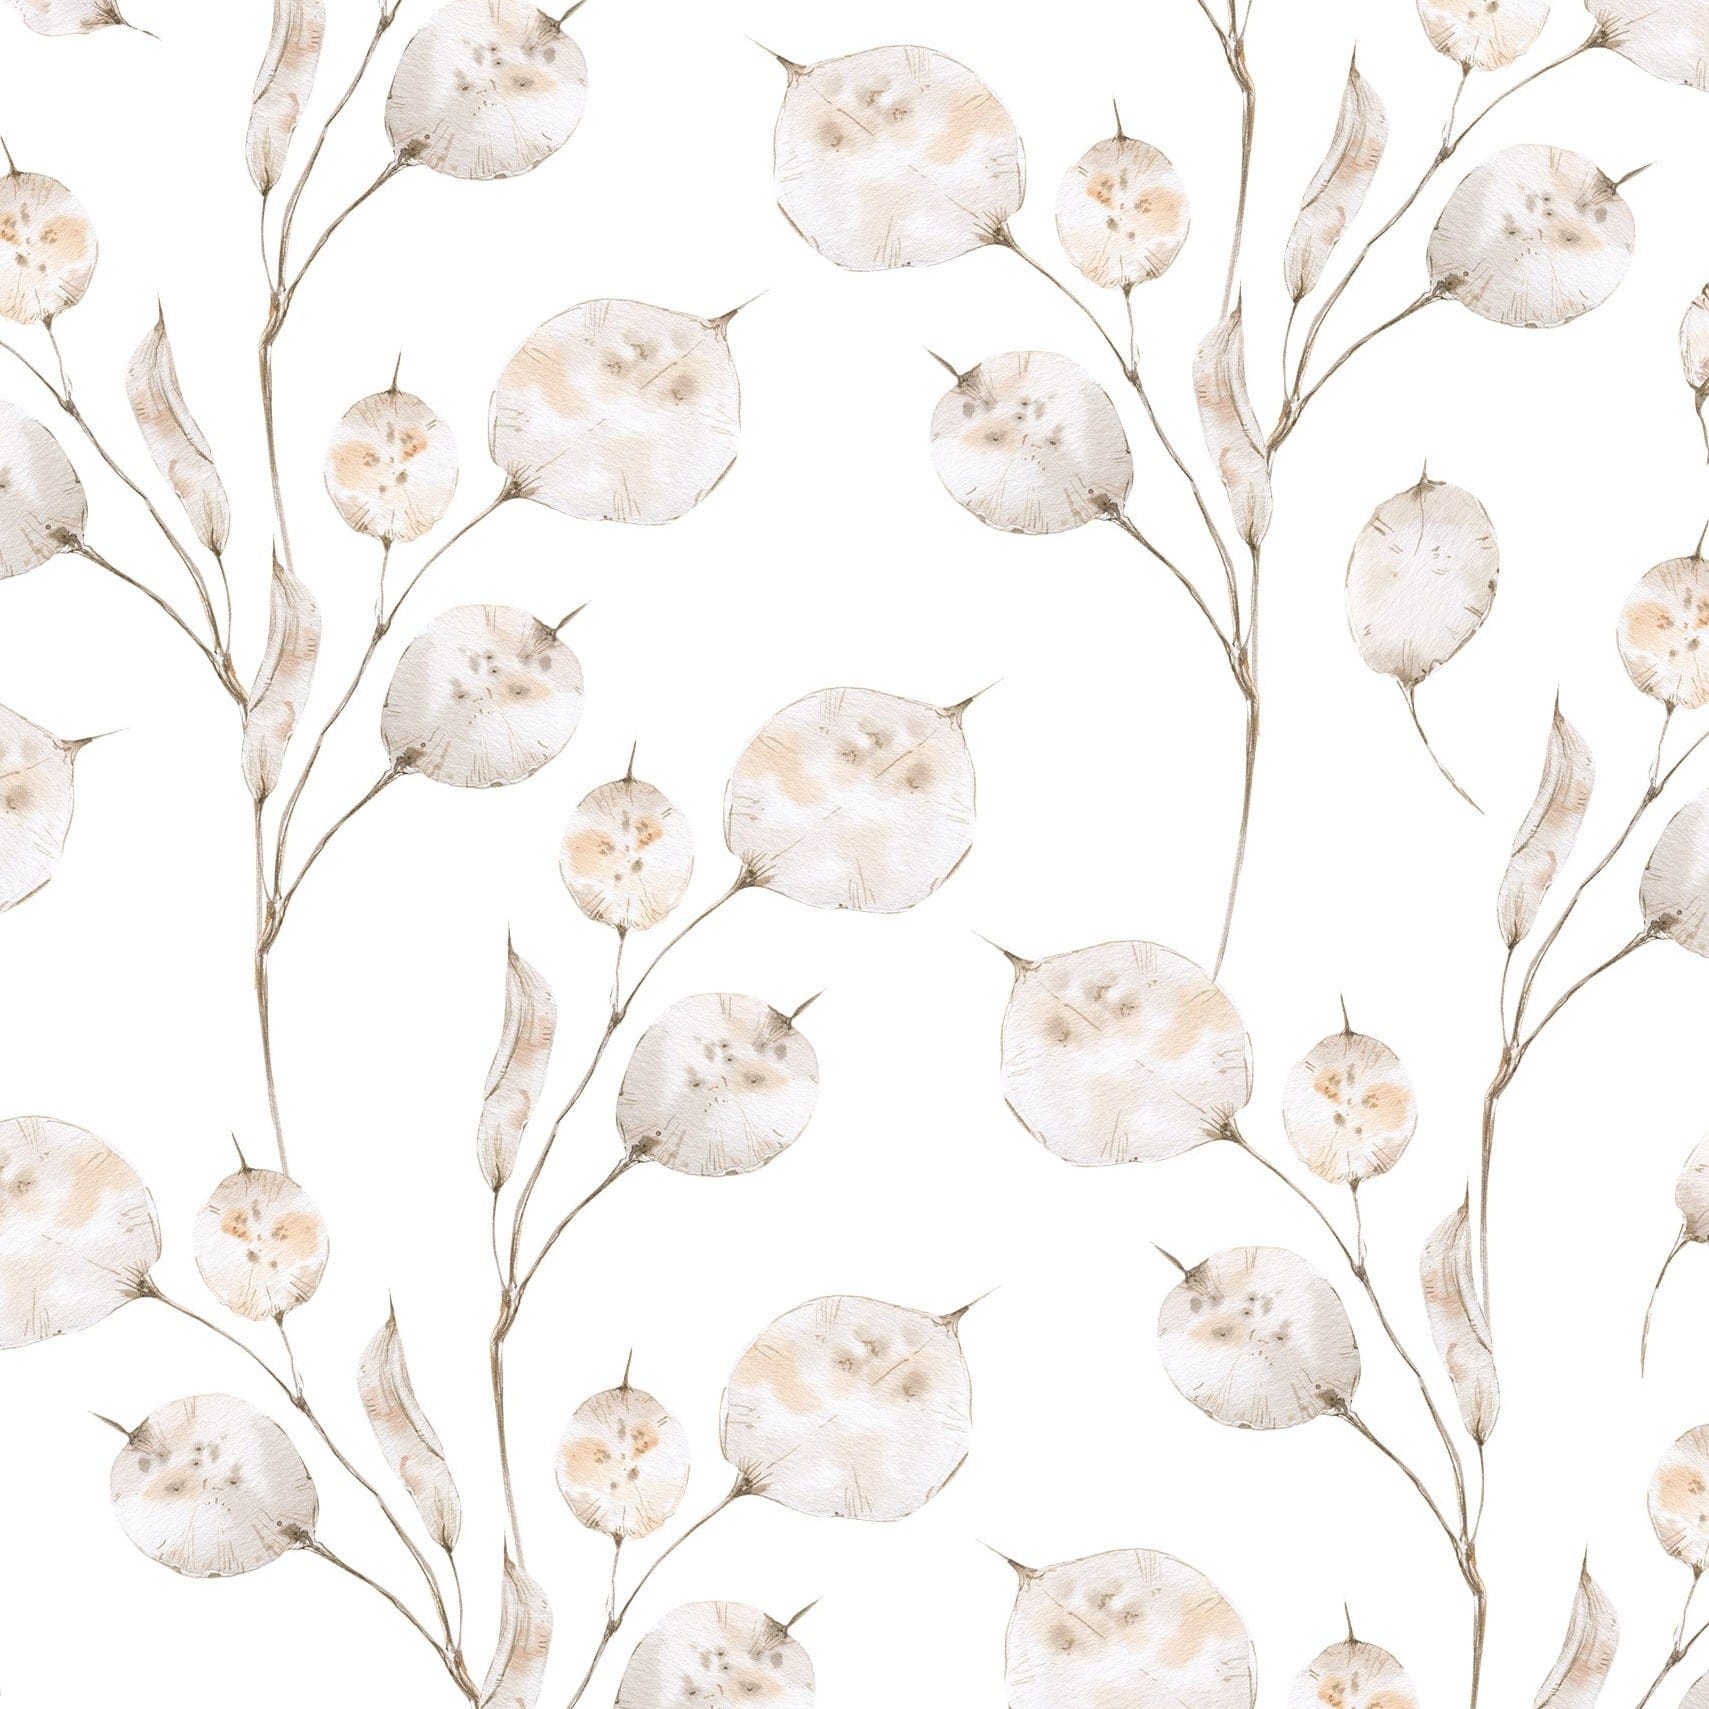 A seamless pattern of Winter Branches Wallpaper showcasing intricate, hand-drawn beige botanical designs with small leaves and buds on a white background.